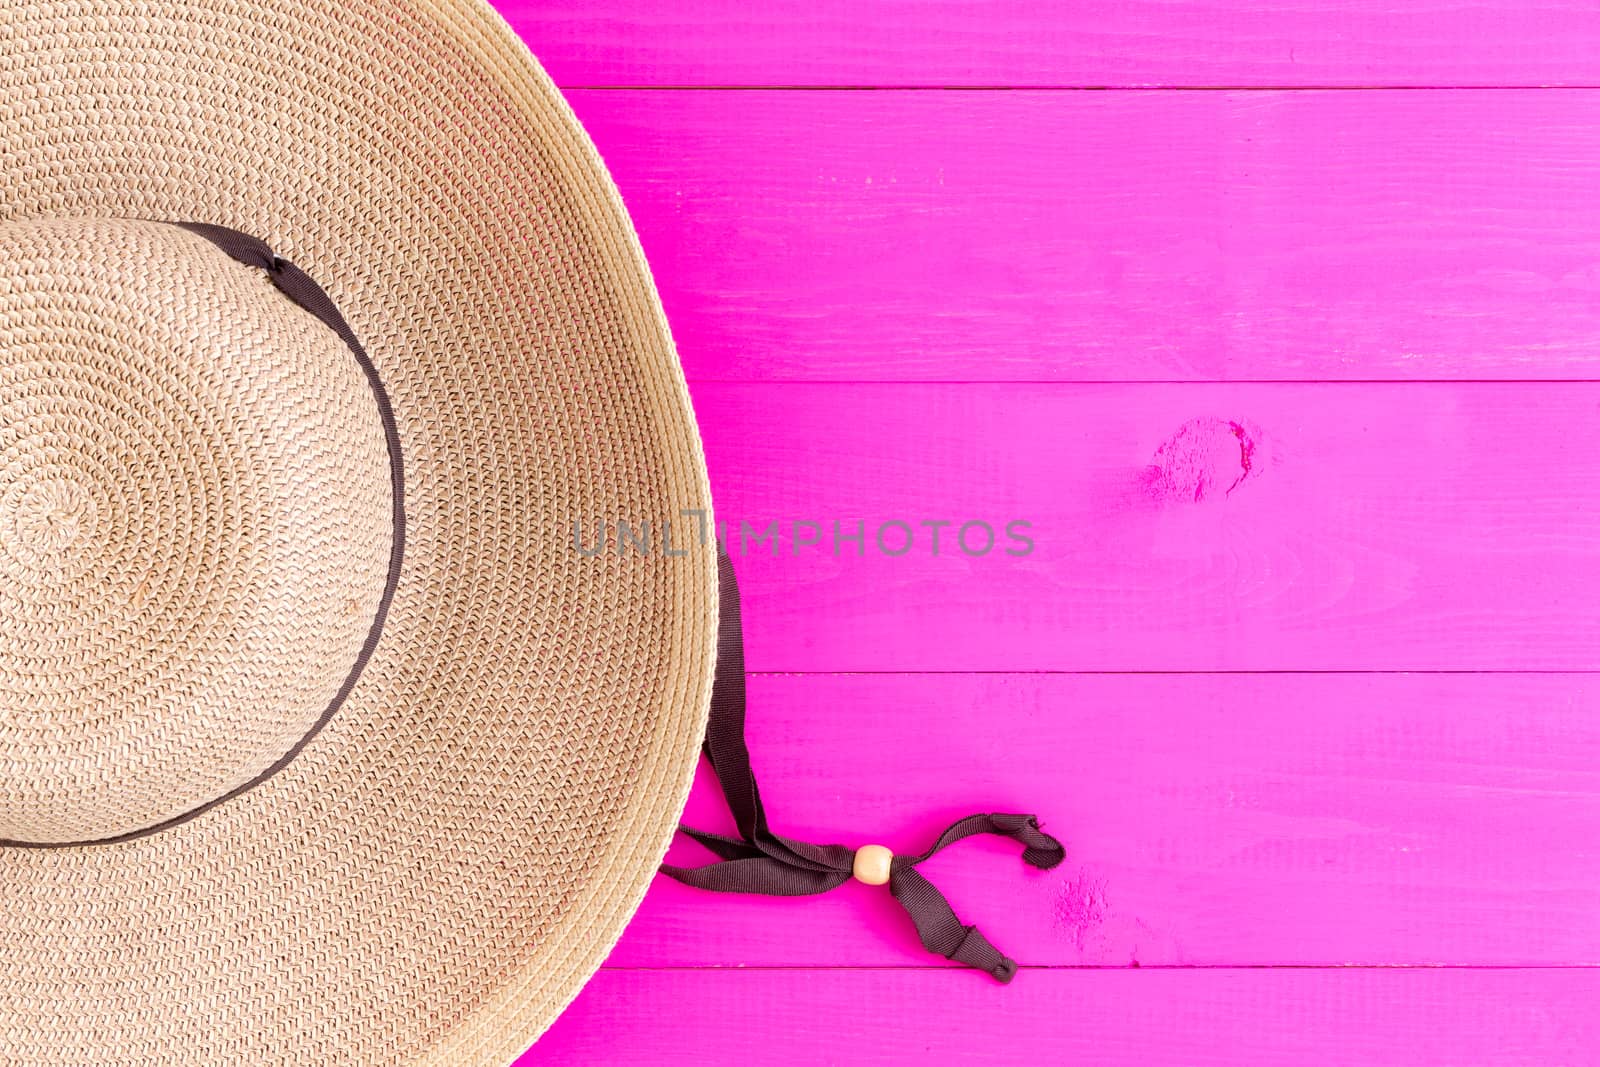 Straw sunhat on vibrant pink background by coskun